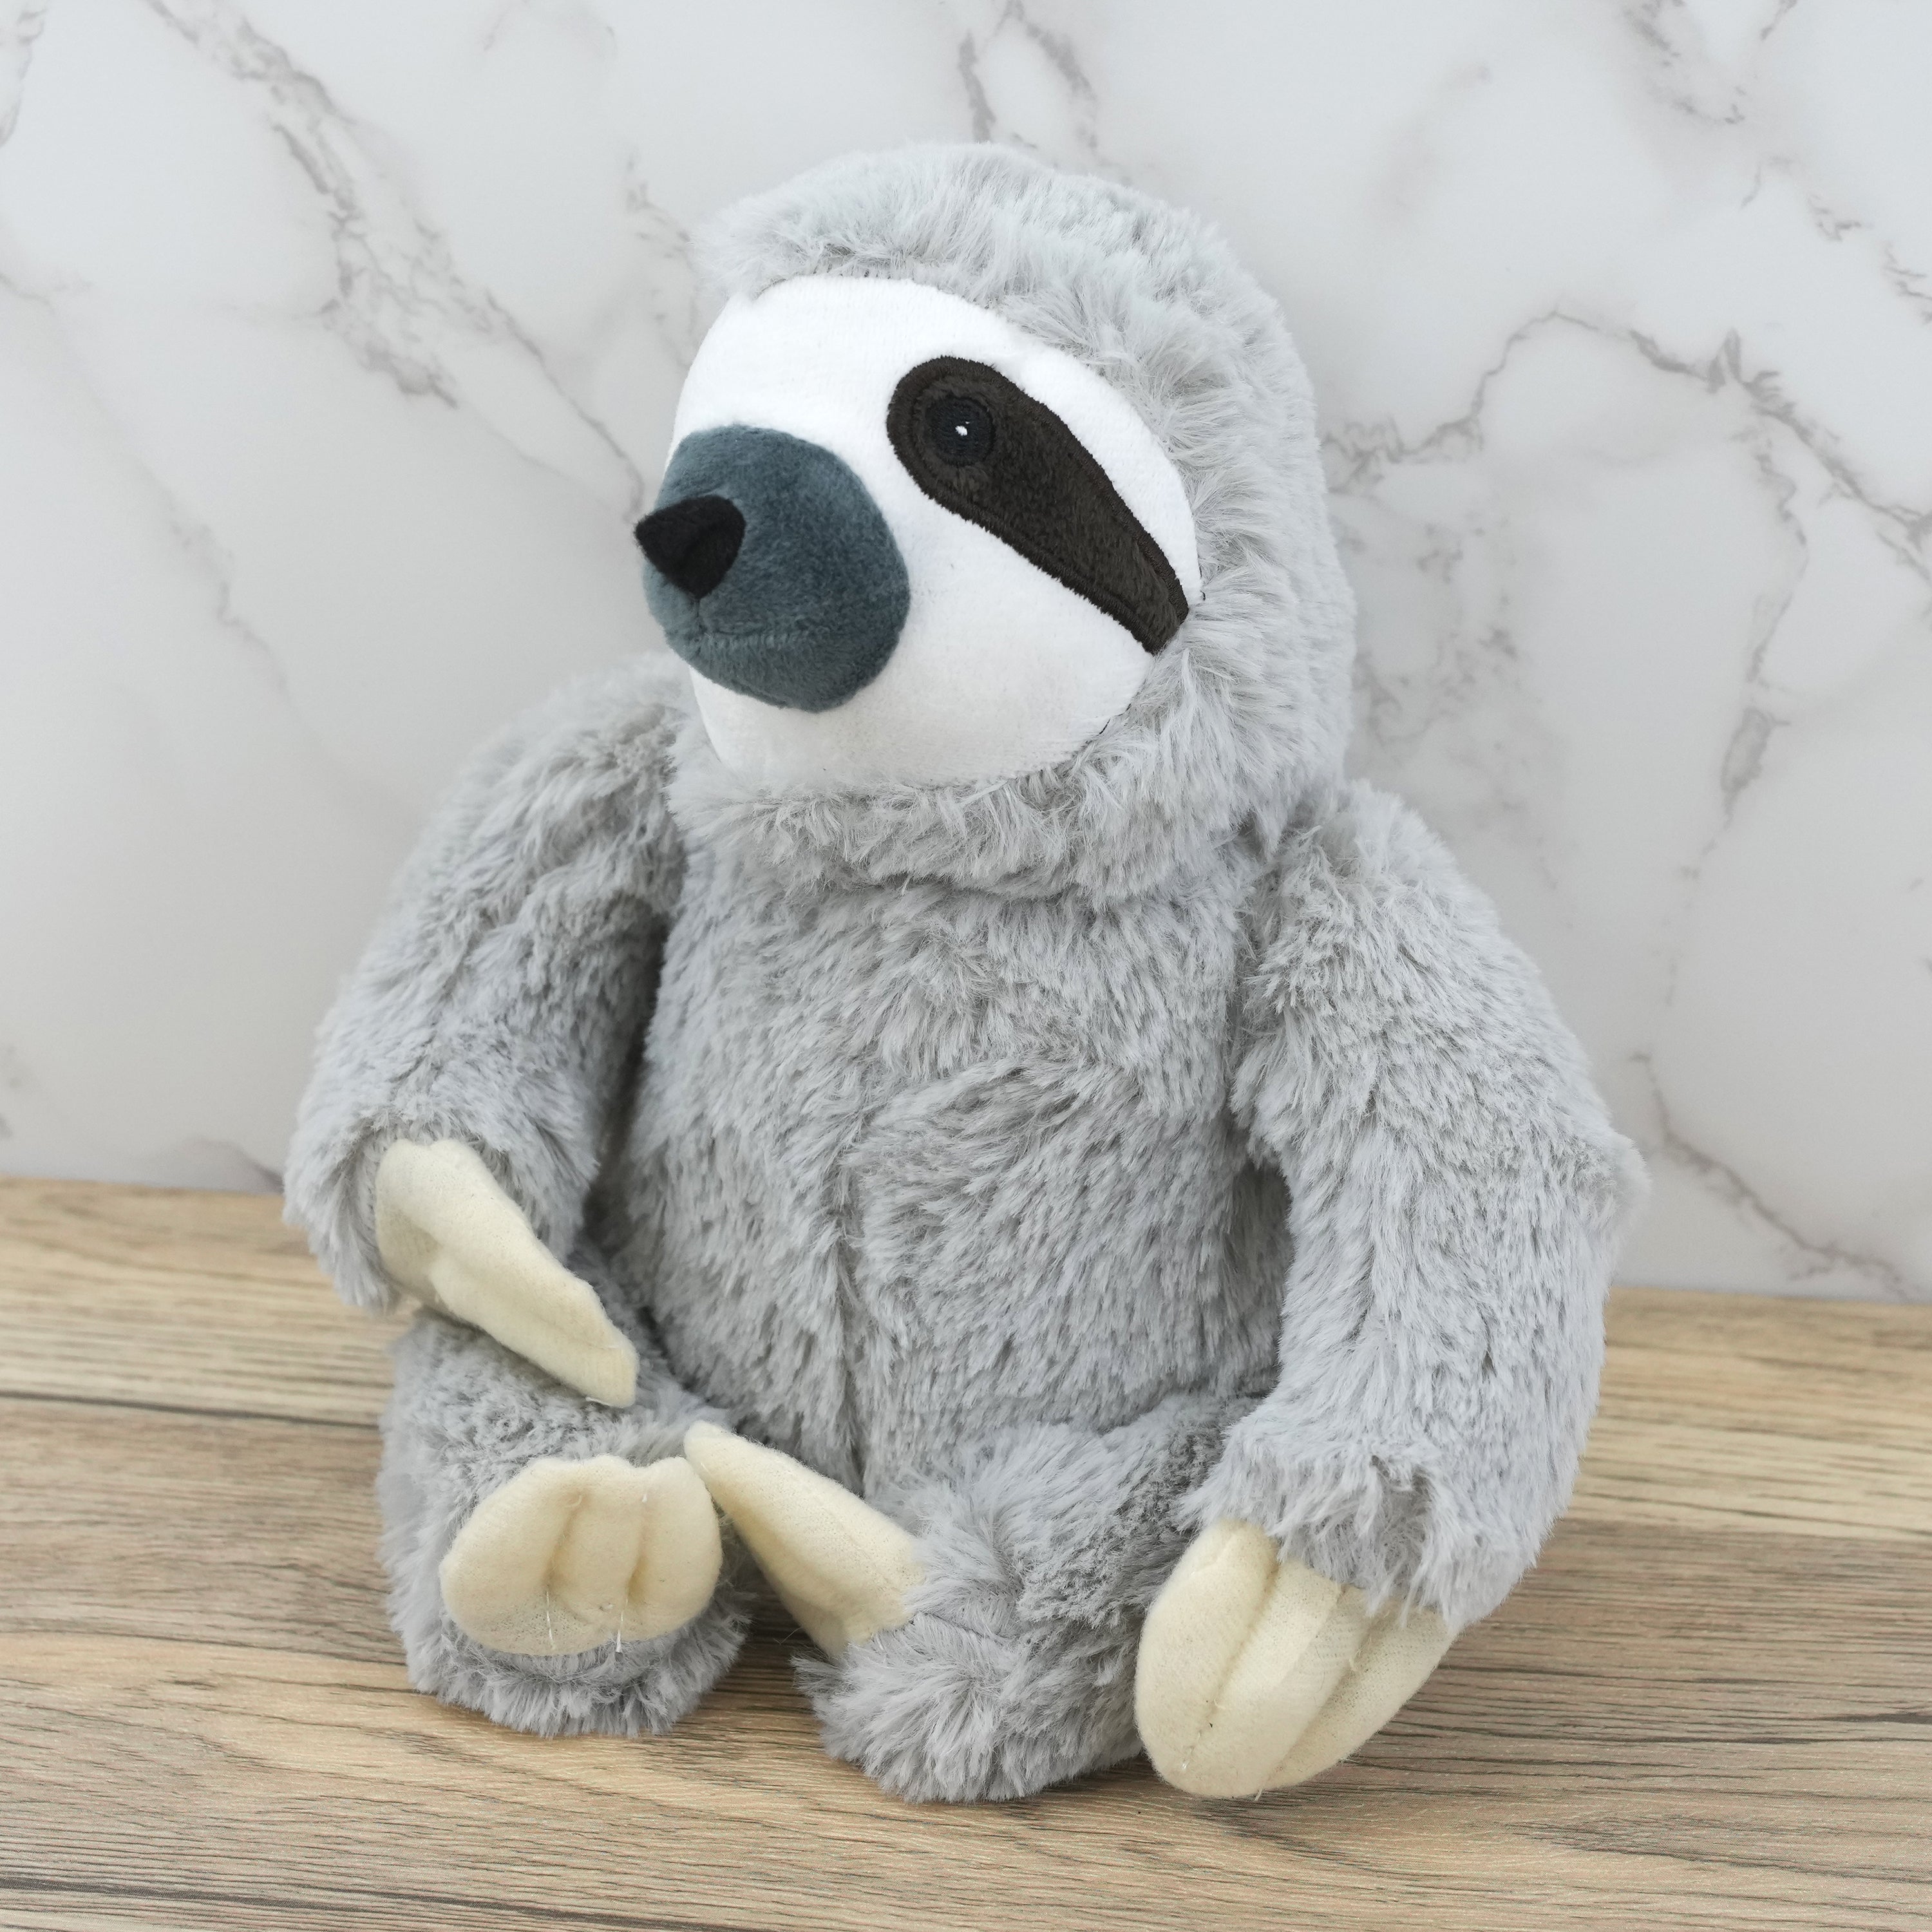 Sloth Door Novelty Stops The Magic Toy Shop - The Magic Toy Shop